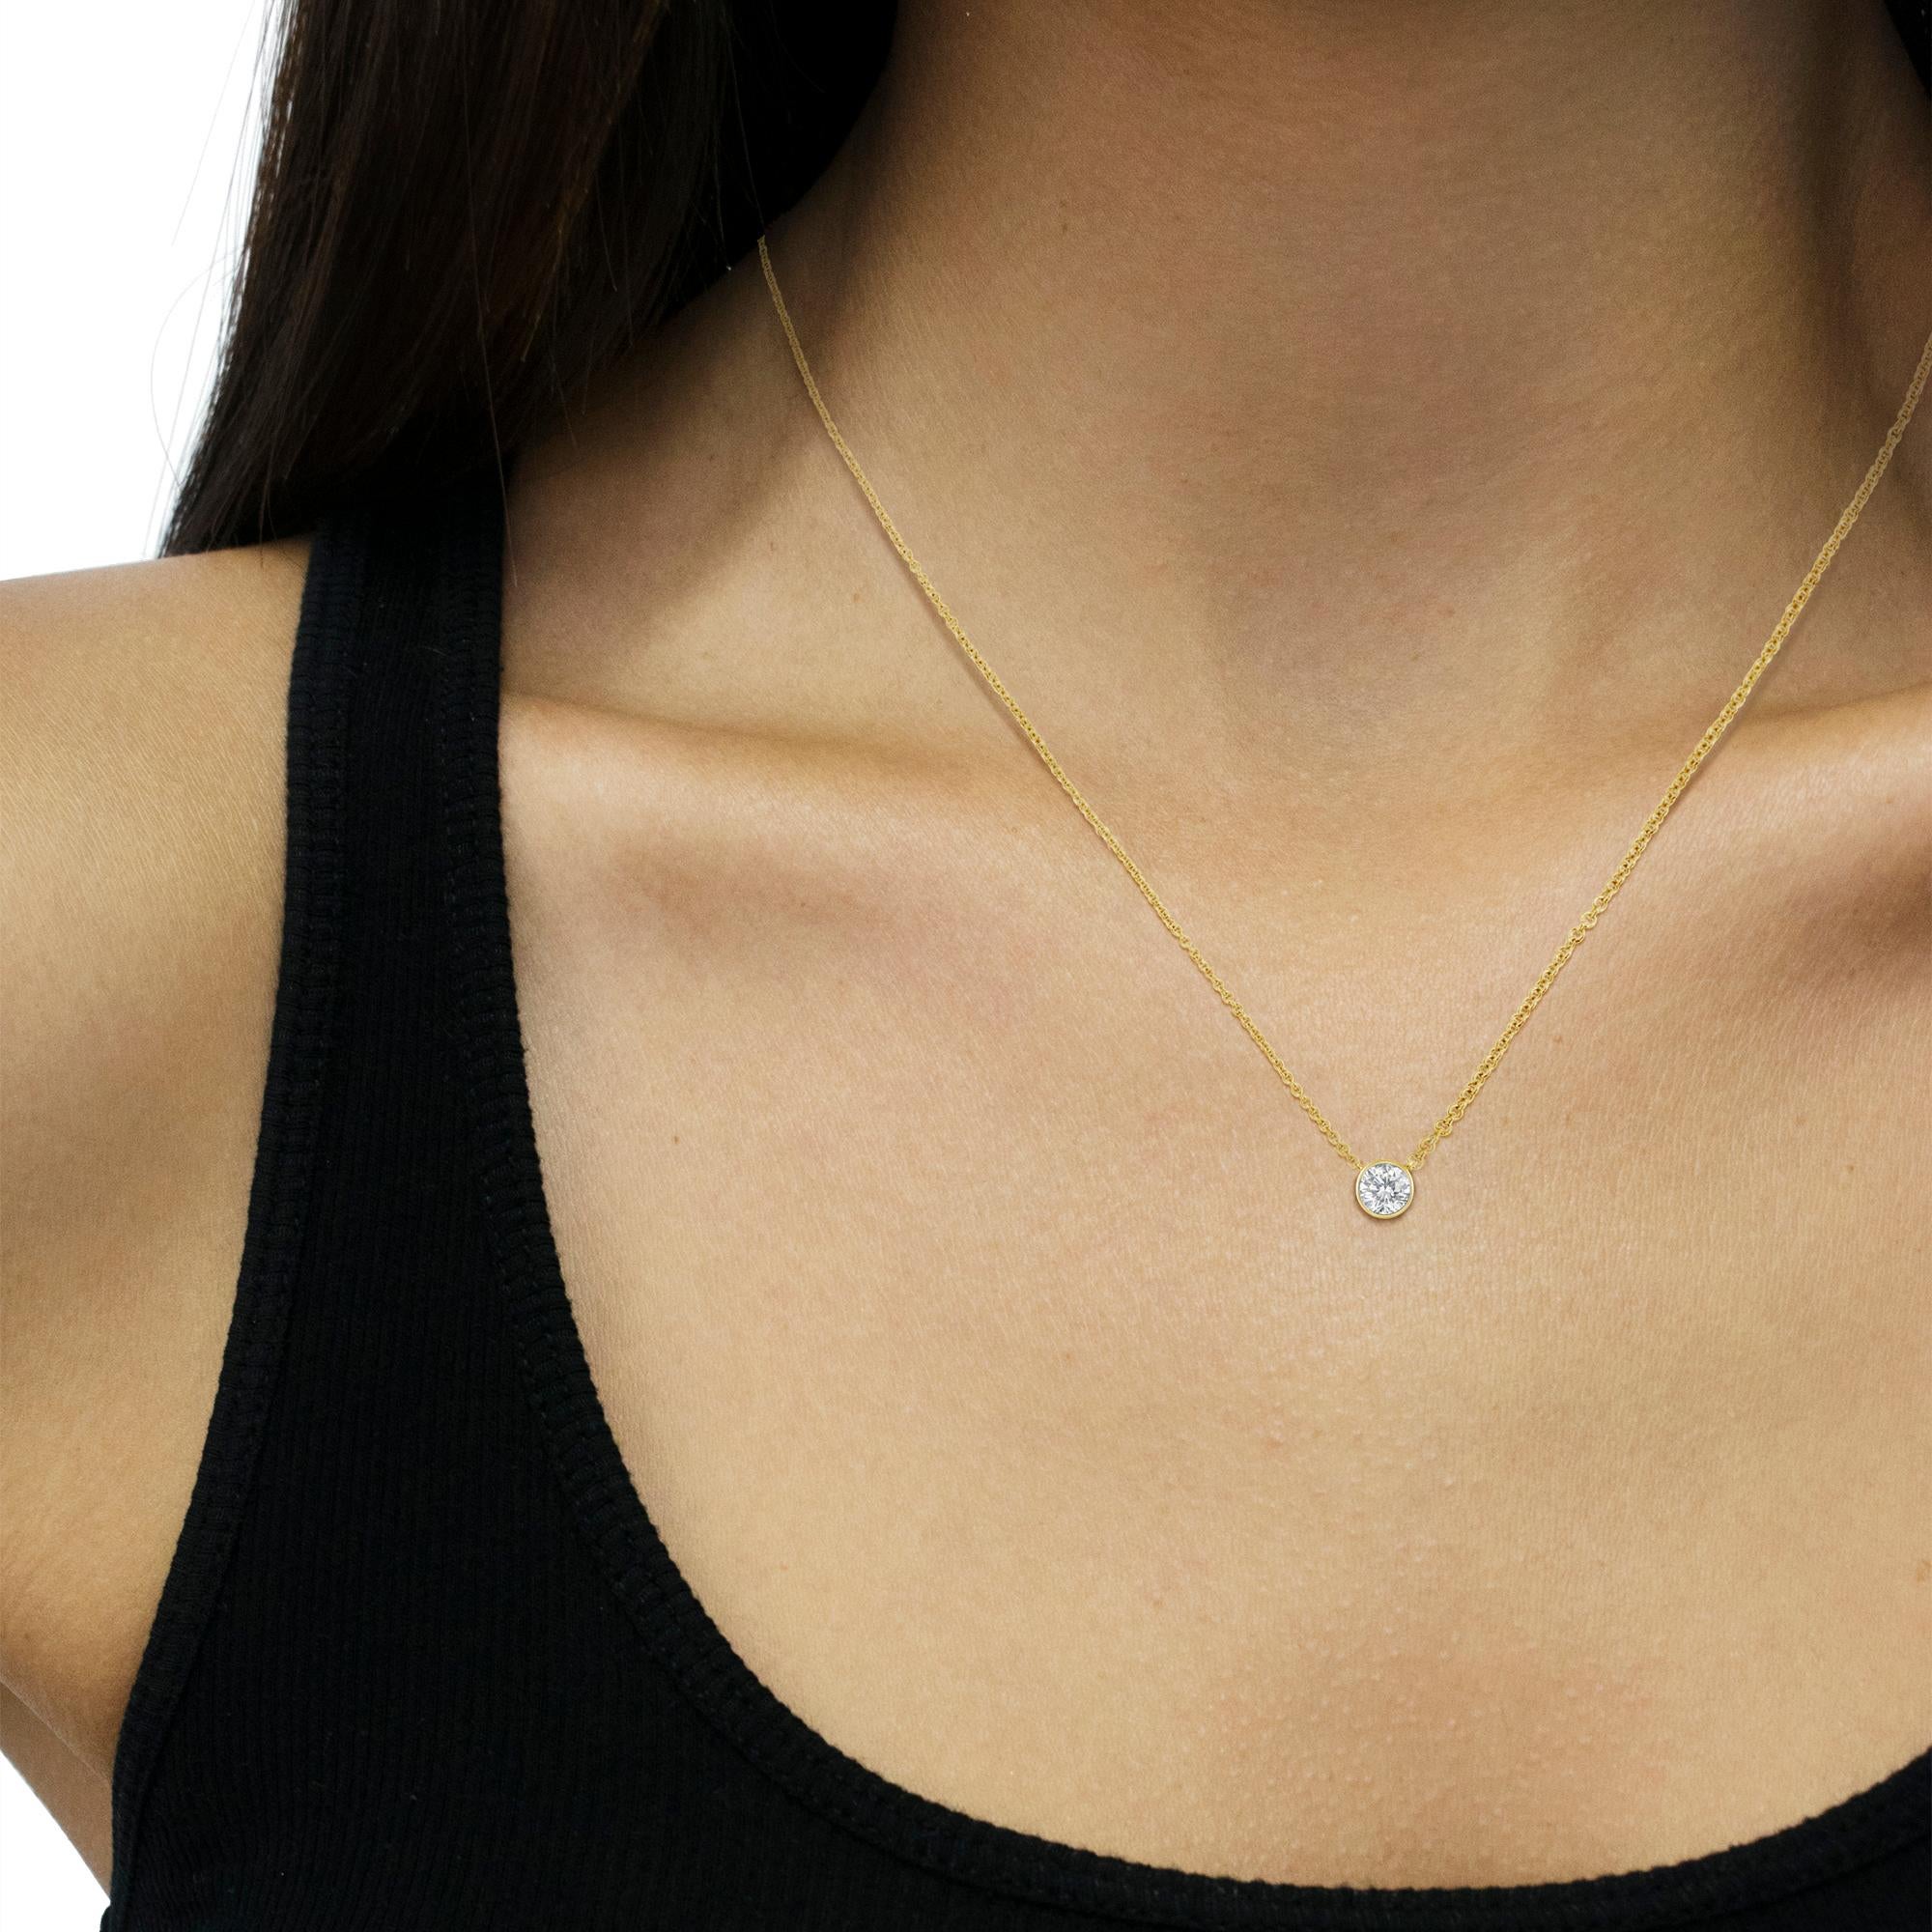 Some things shouldn't be reinvented, which is why we created the solitaire diamond necklace. This understated yet dazzling diamond-forward piece is the perfect way to highlight every big occasion, transition, and personal achievement in your life.